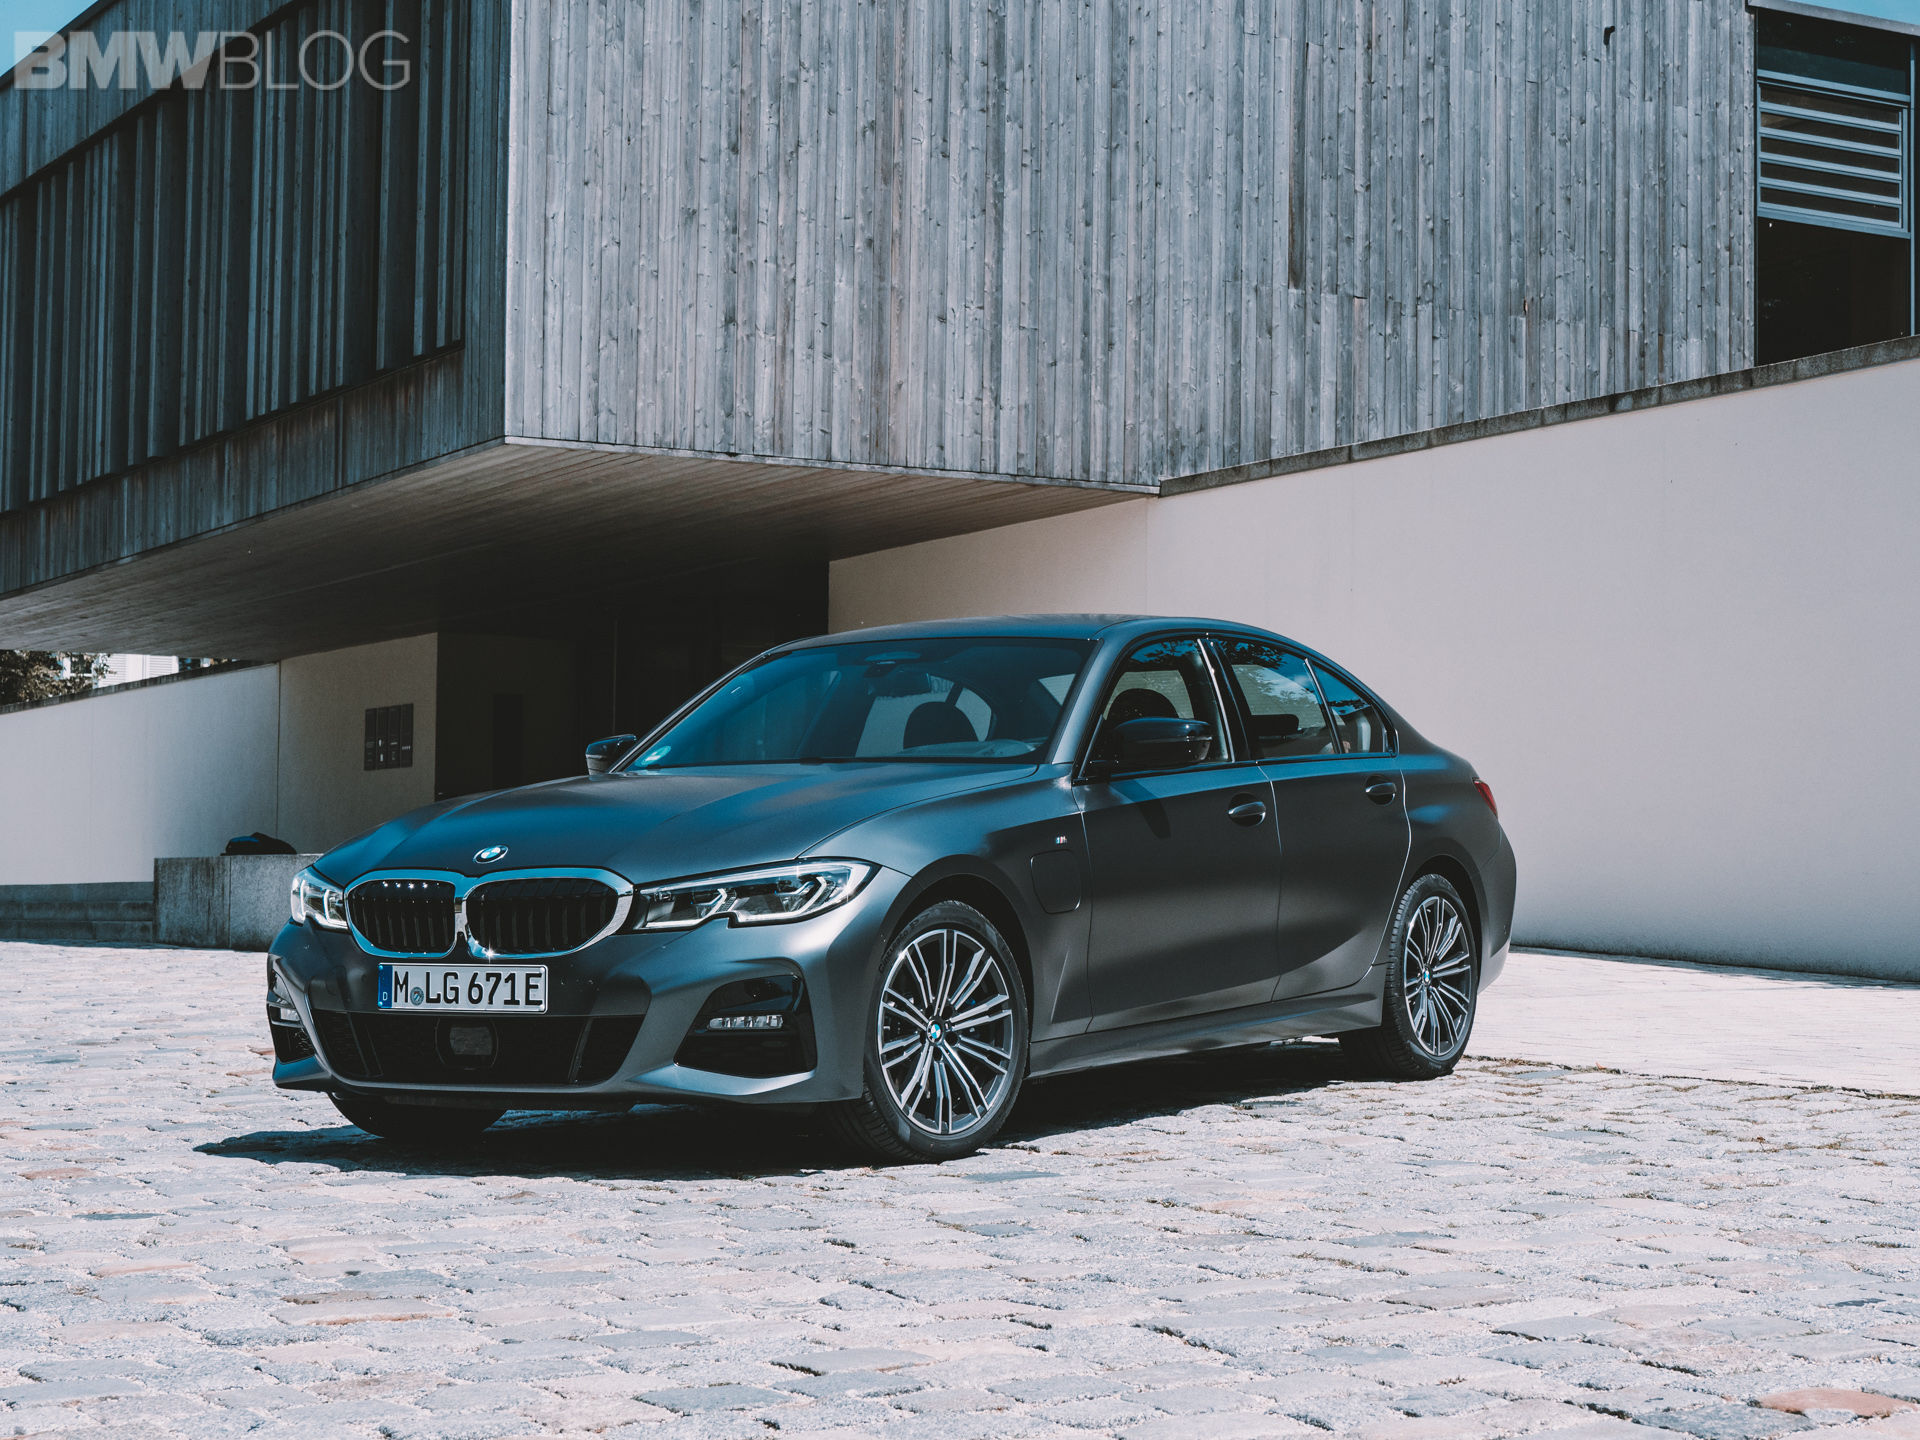 Bijdrager Uitgang titel Photoshoot with the new 2020 BMW 330e Plug-in hybrid